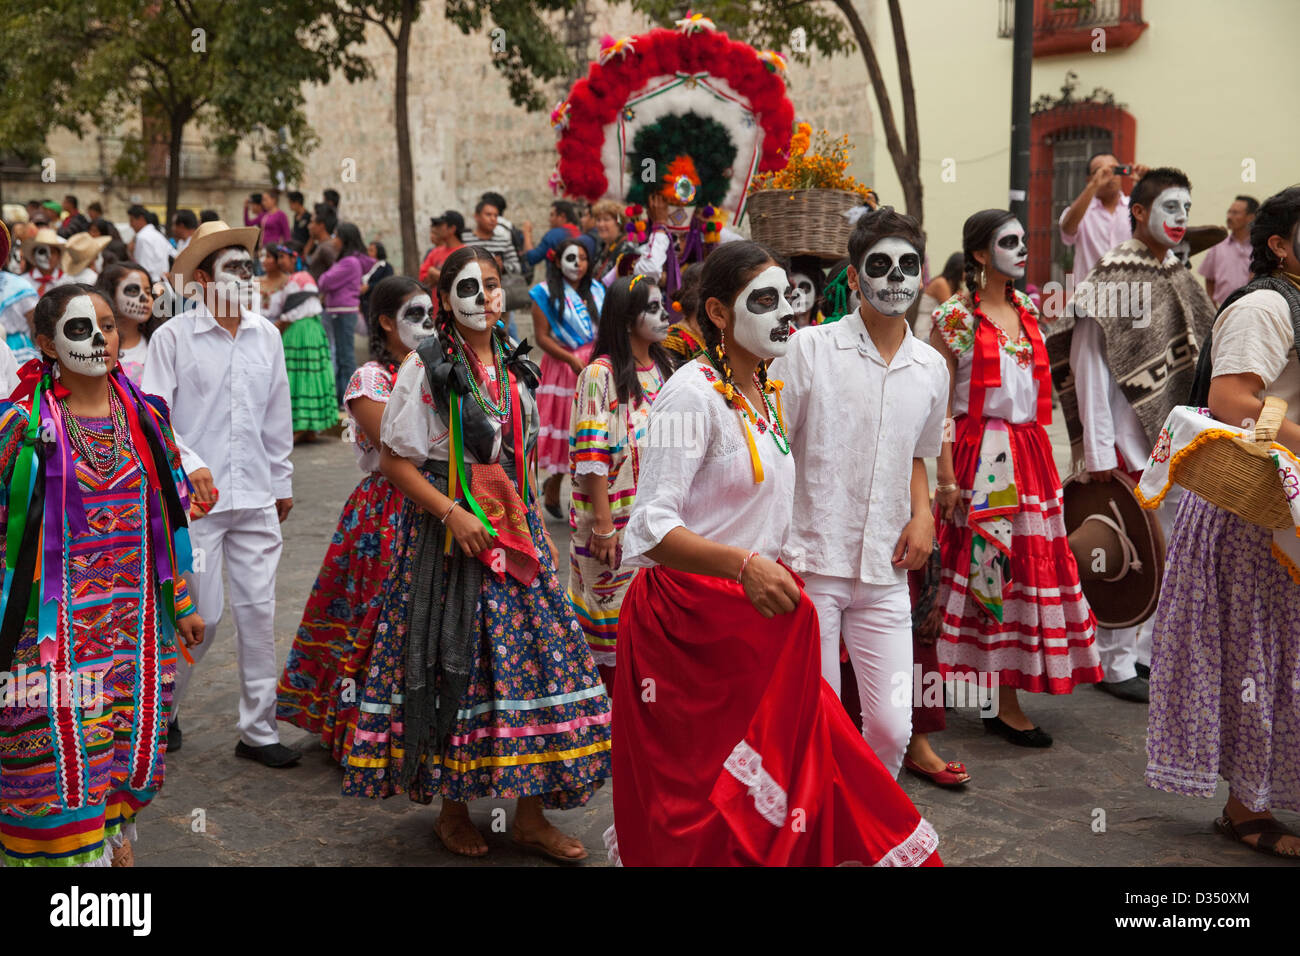 Day of the Dead parade with participants in traditional clothing and spectators in Oaxaca, Mexico. Stock Photo